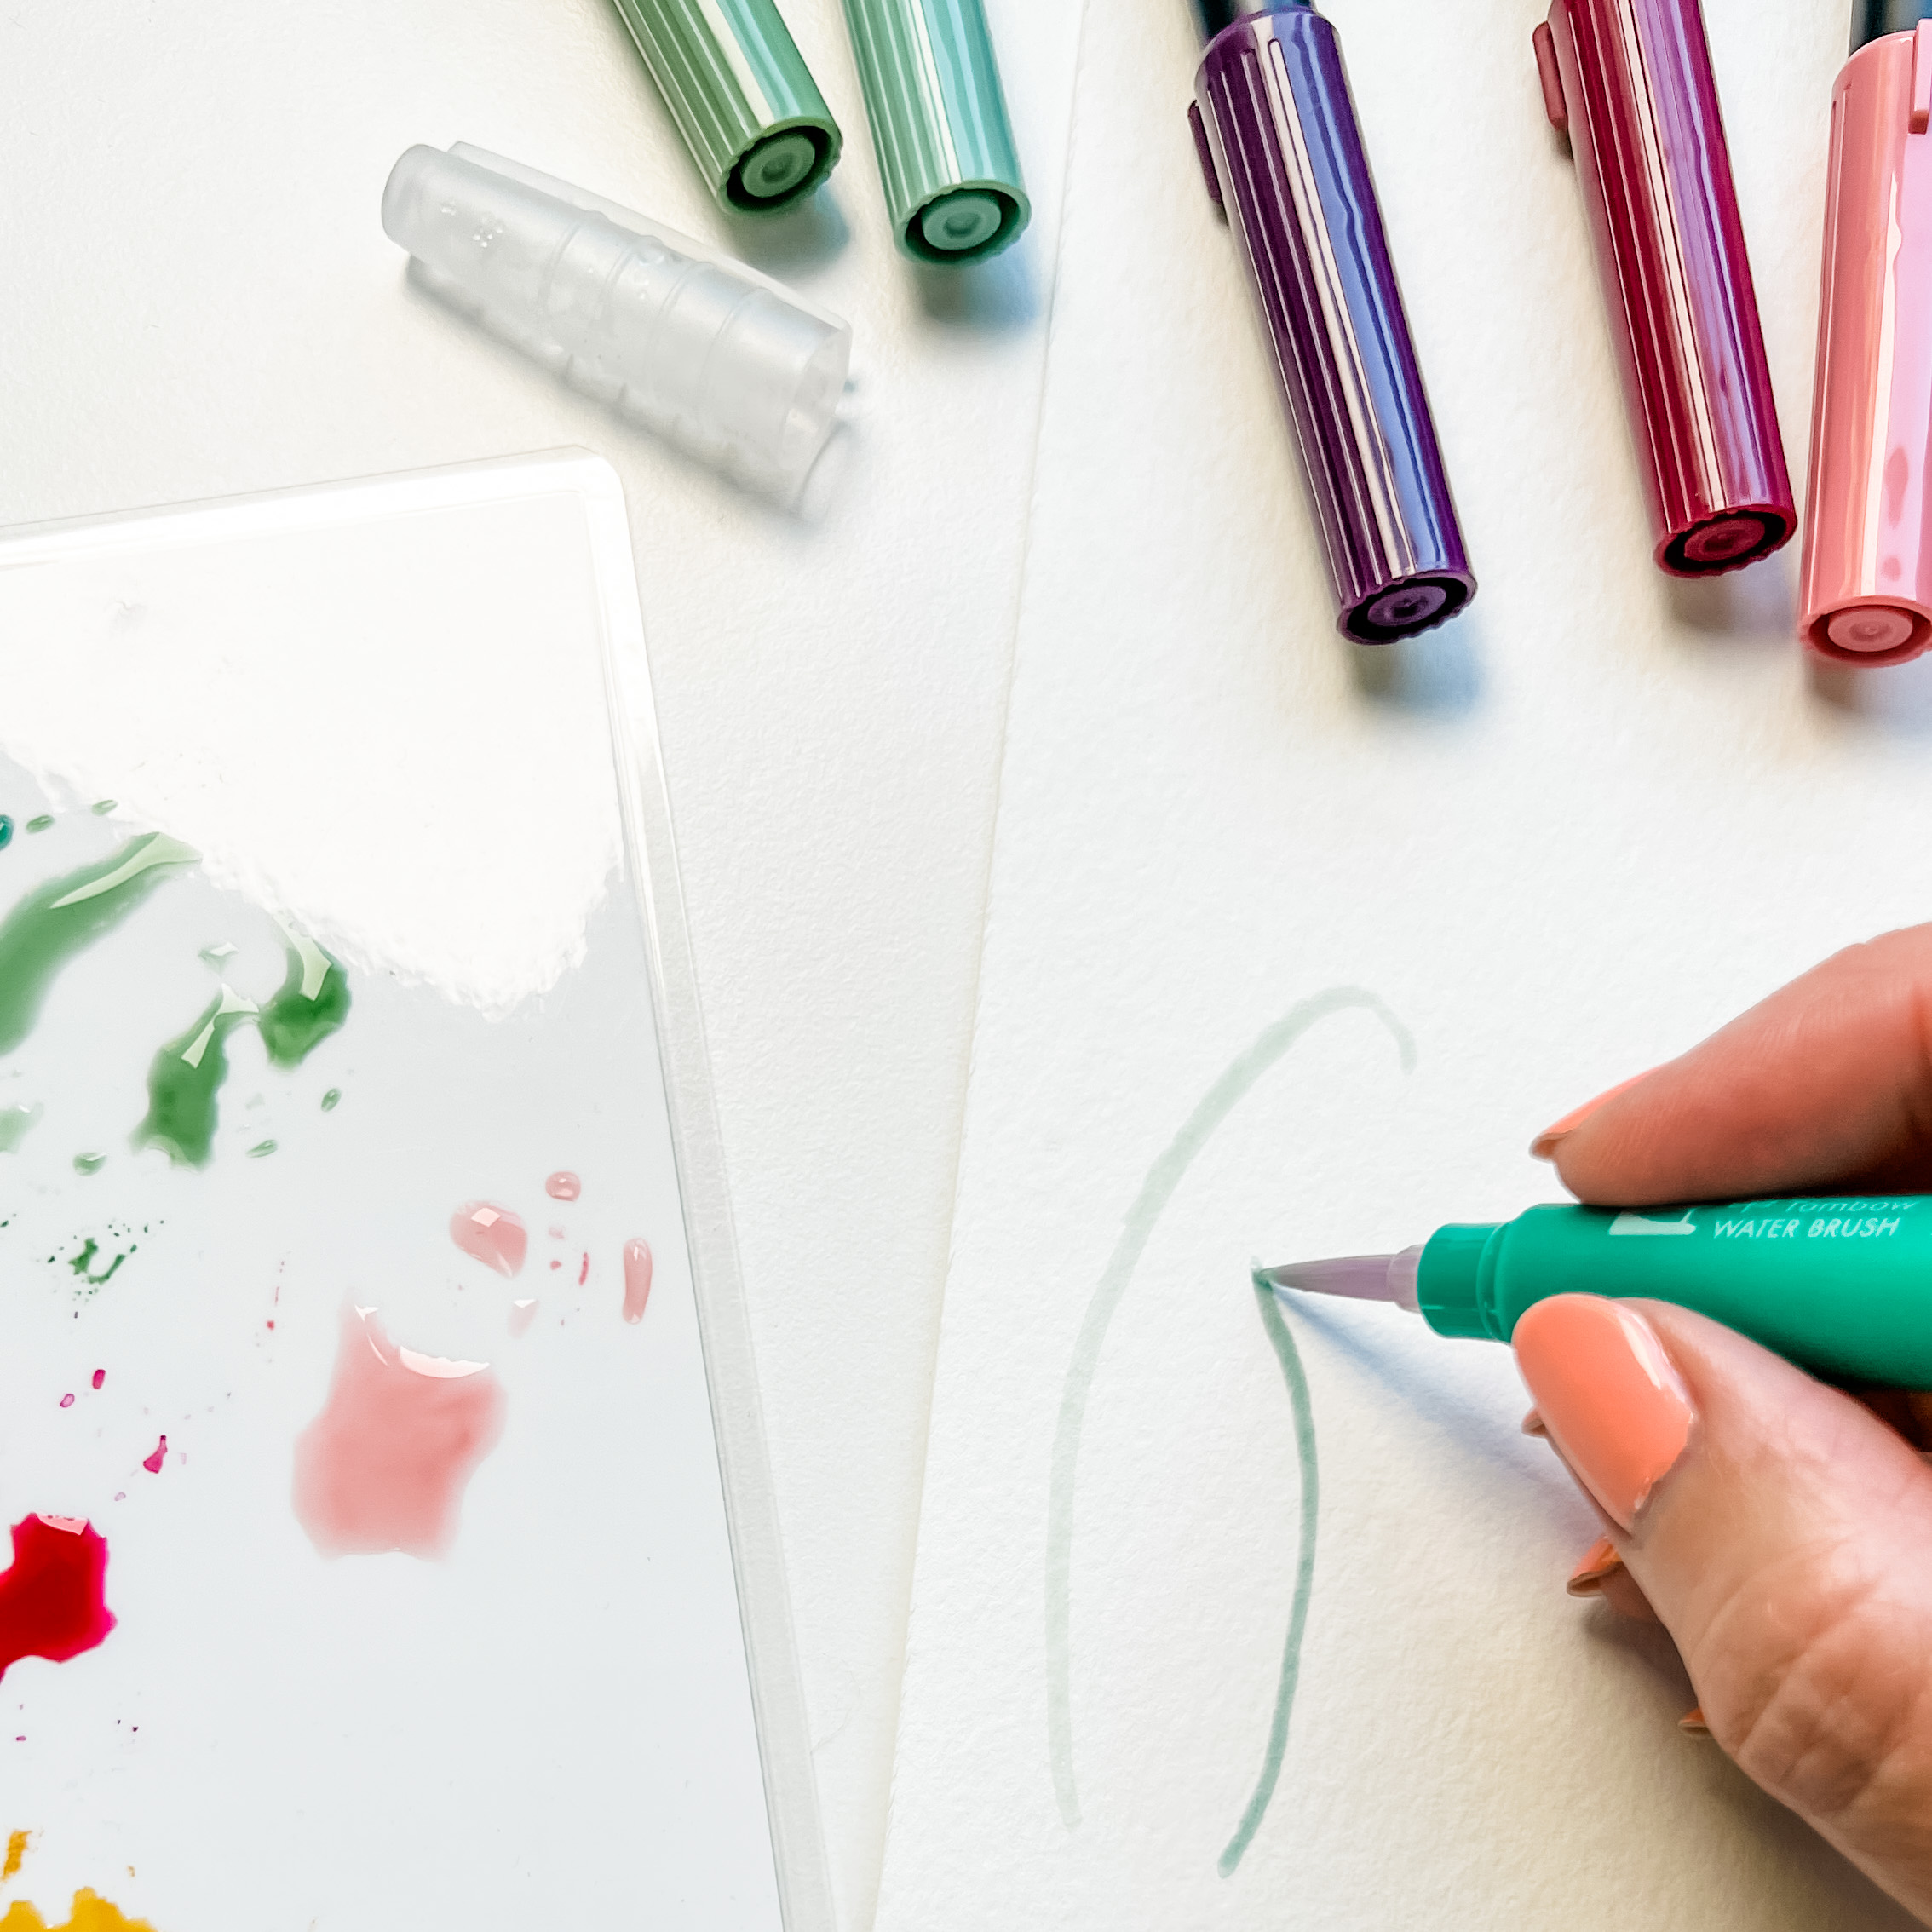 Paint a Wildflower Card with Dual Brush Pens by Jessica Mack on behalf of Tombow